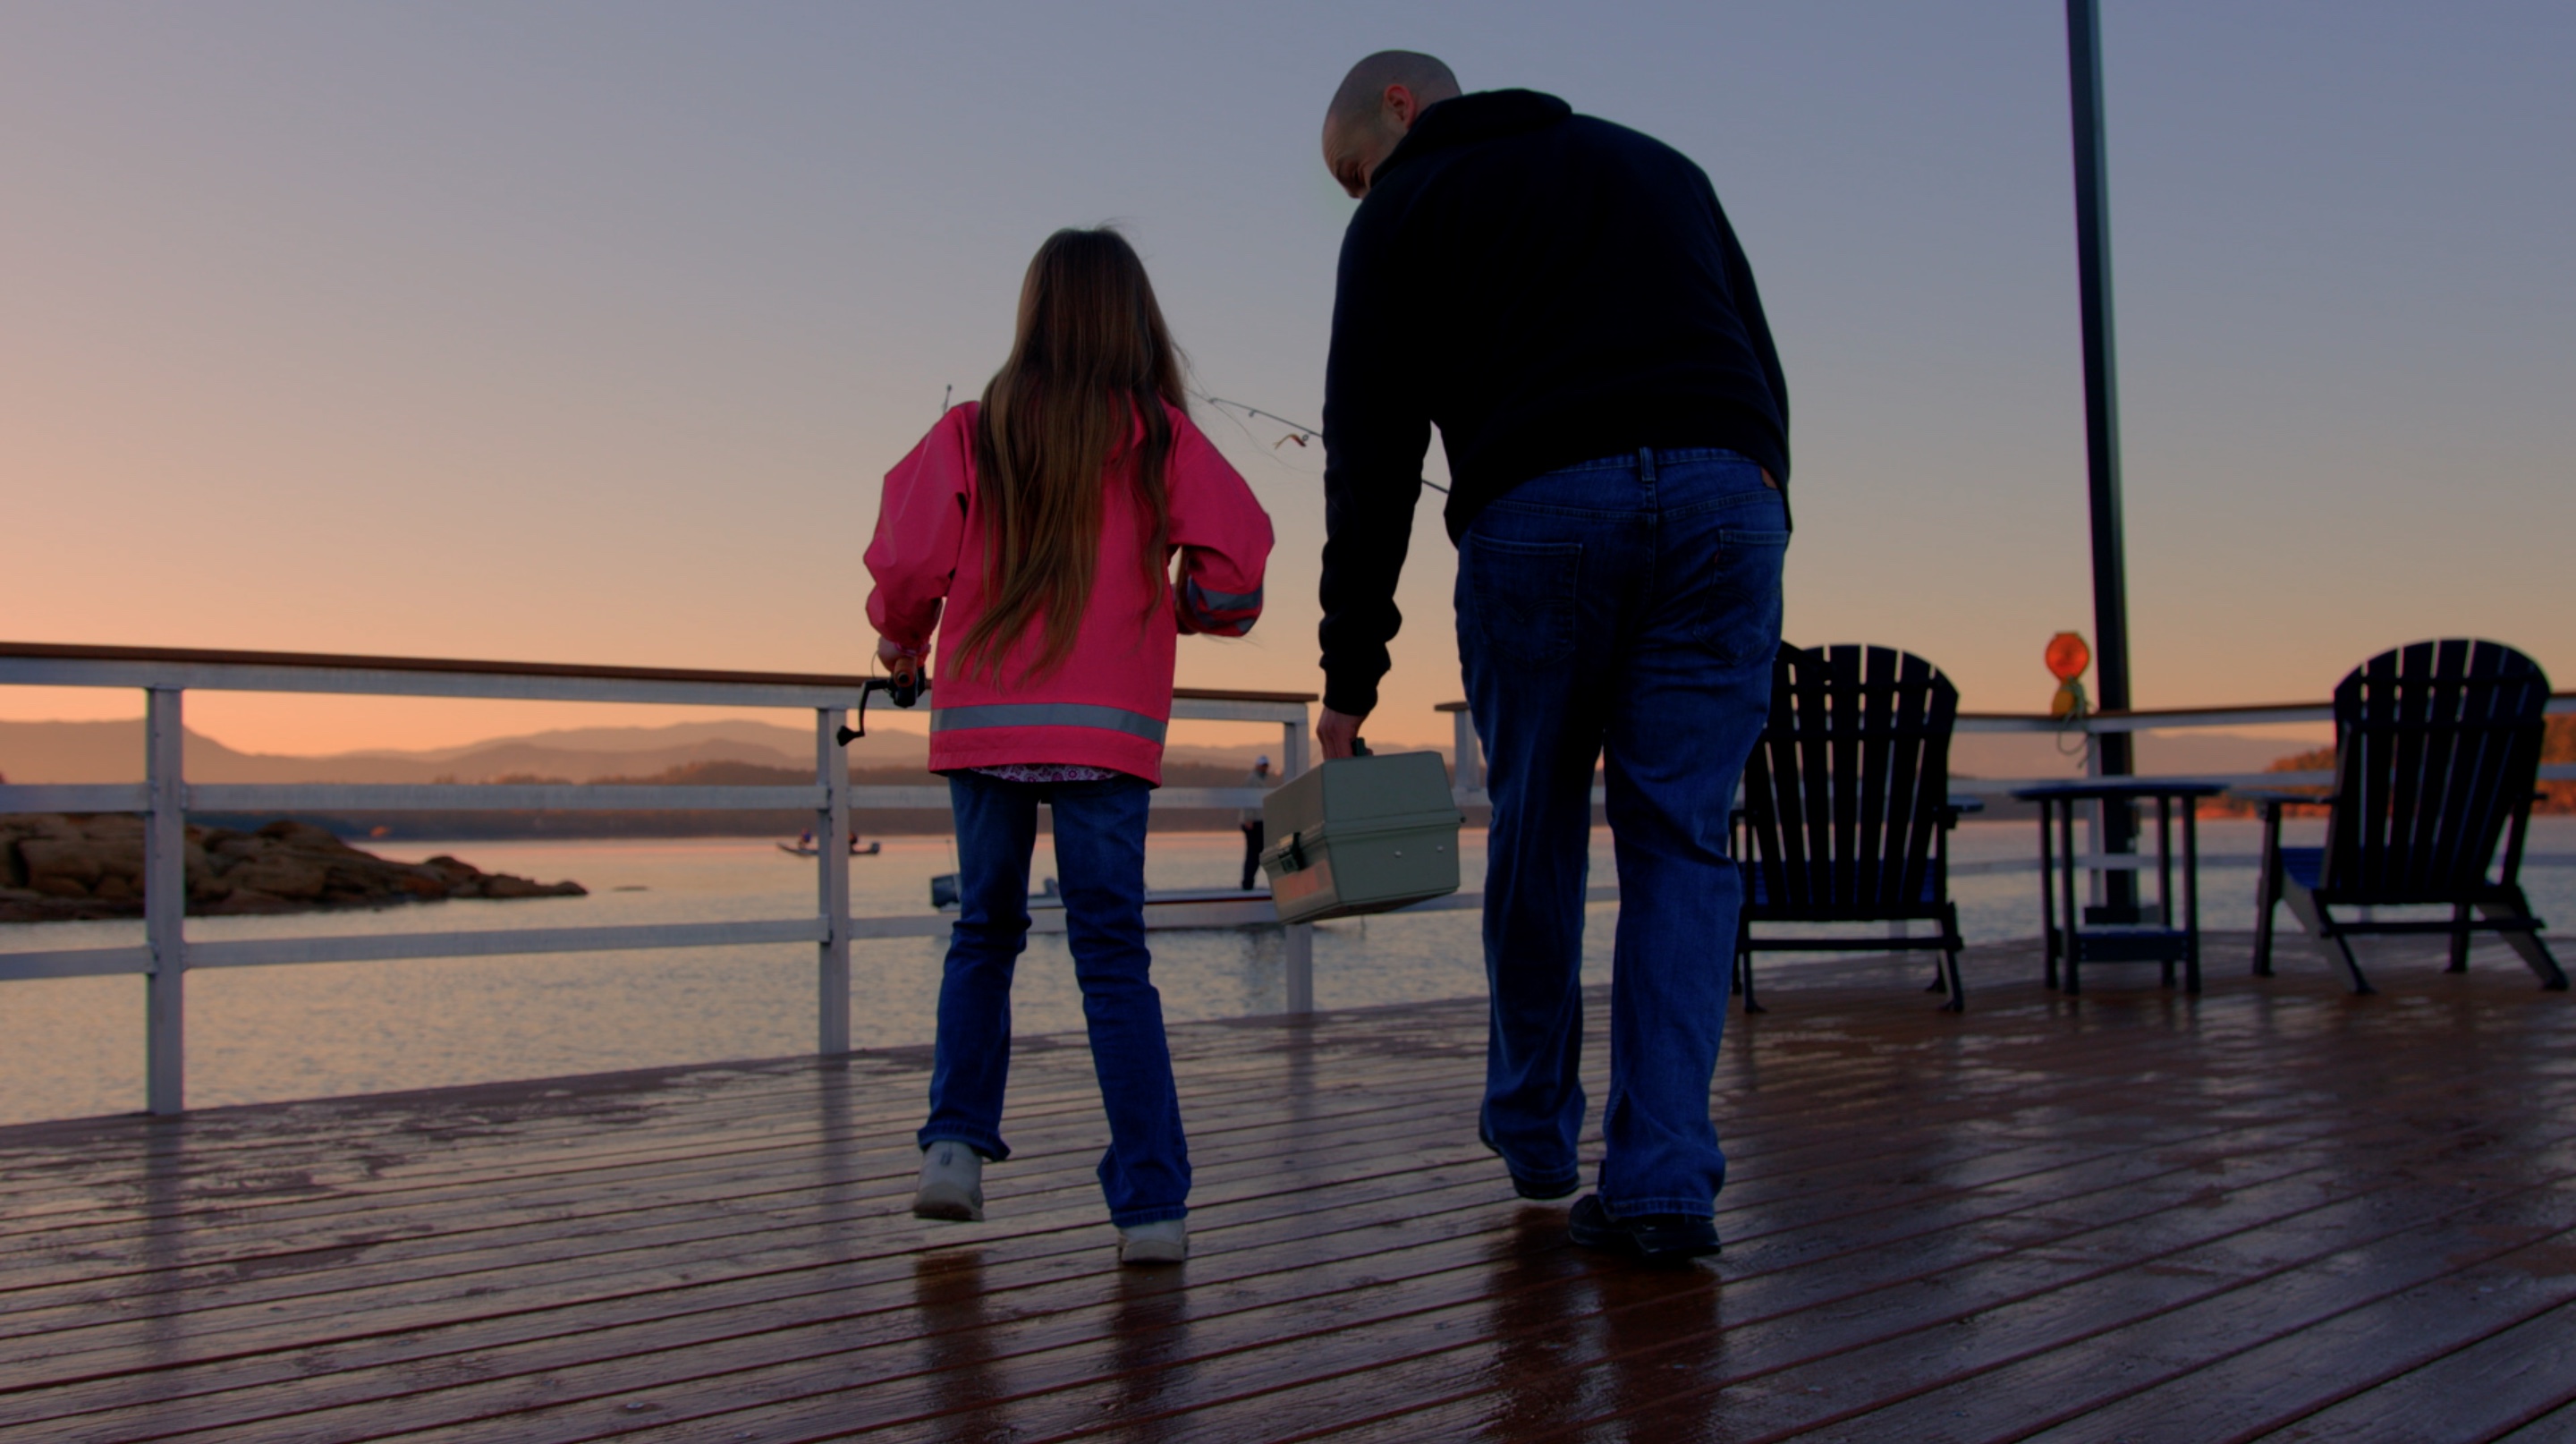 A man and little girl carry fishing equipment on a wet deck at sunrise.